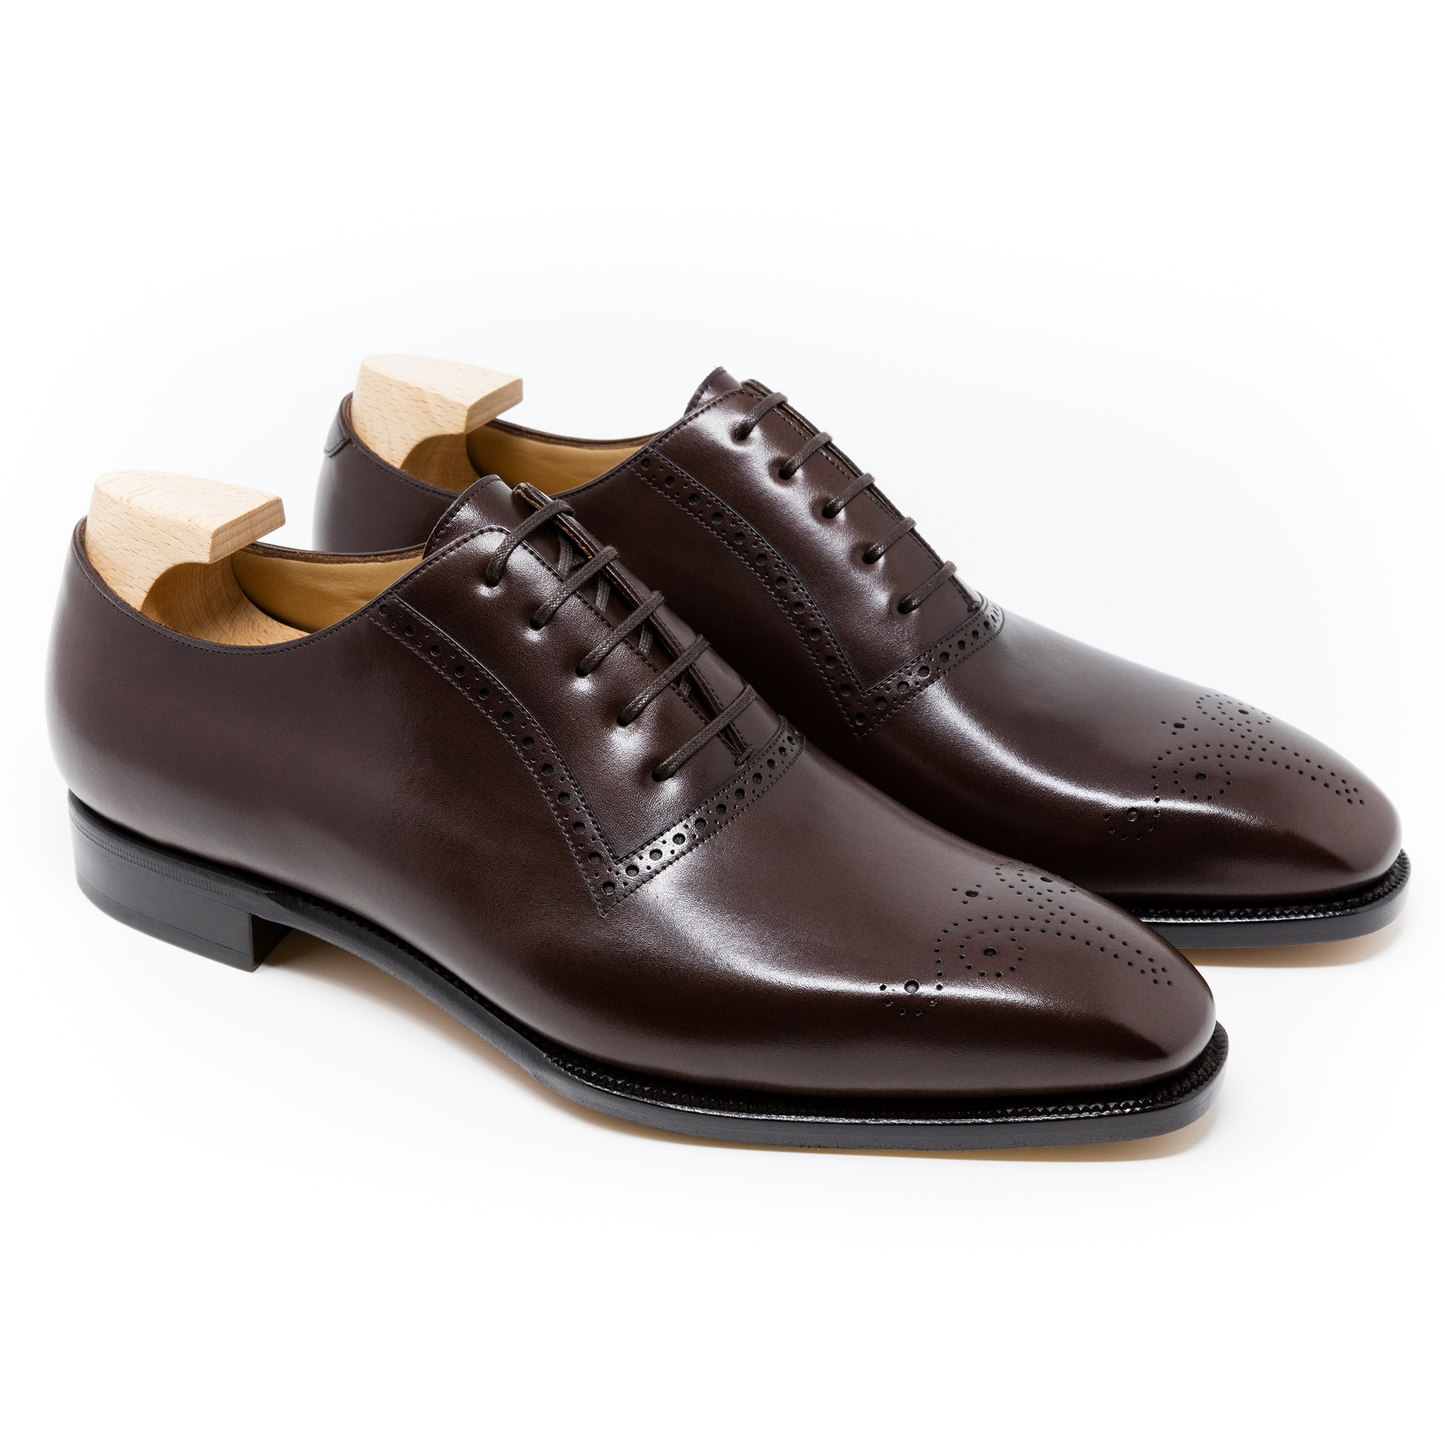 TLB Mallorca leather shoes 107 / PICASSO / VEGANO DARK BROWN